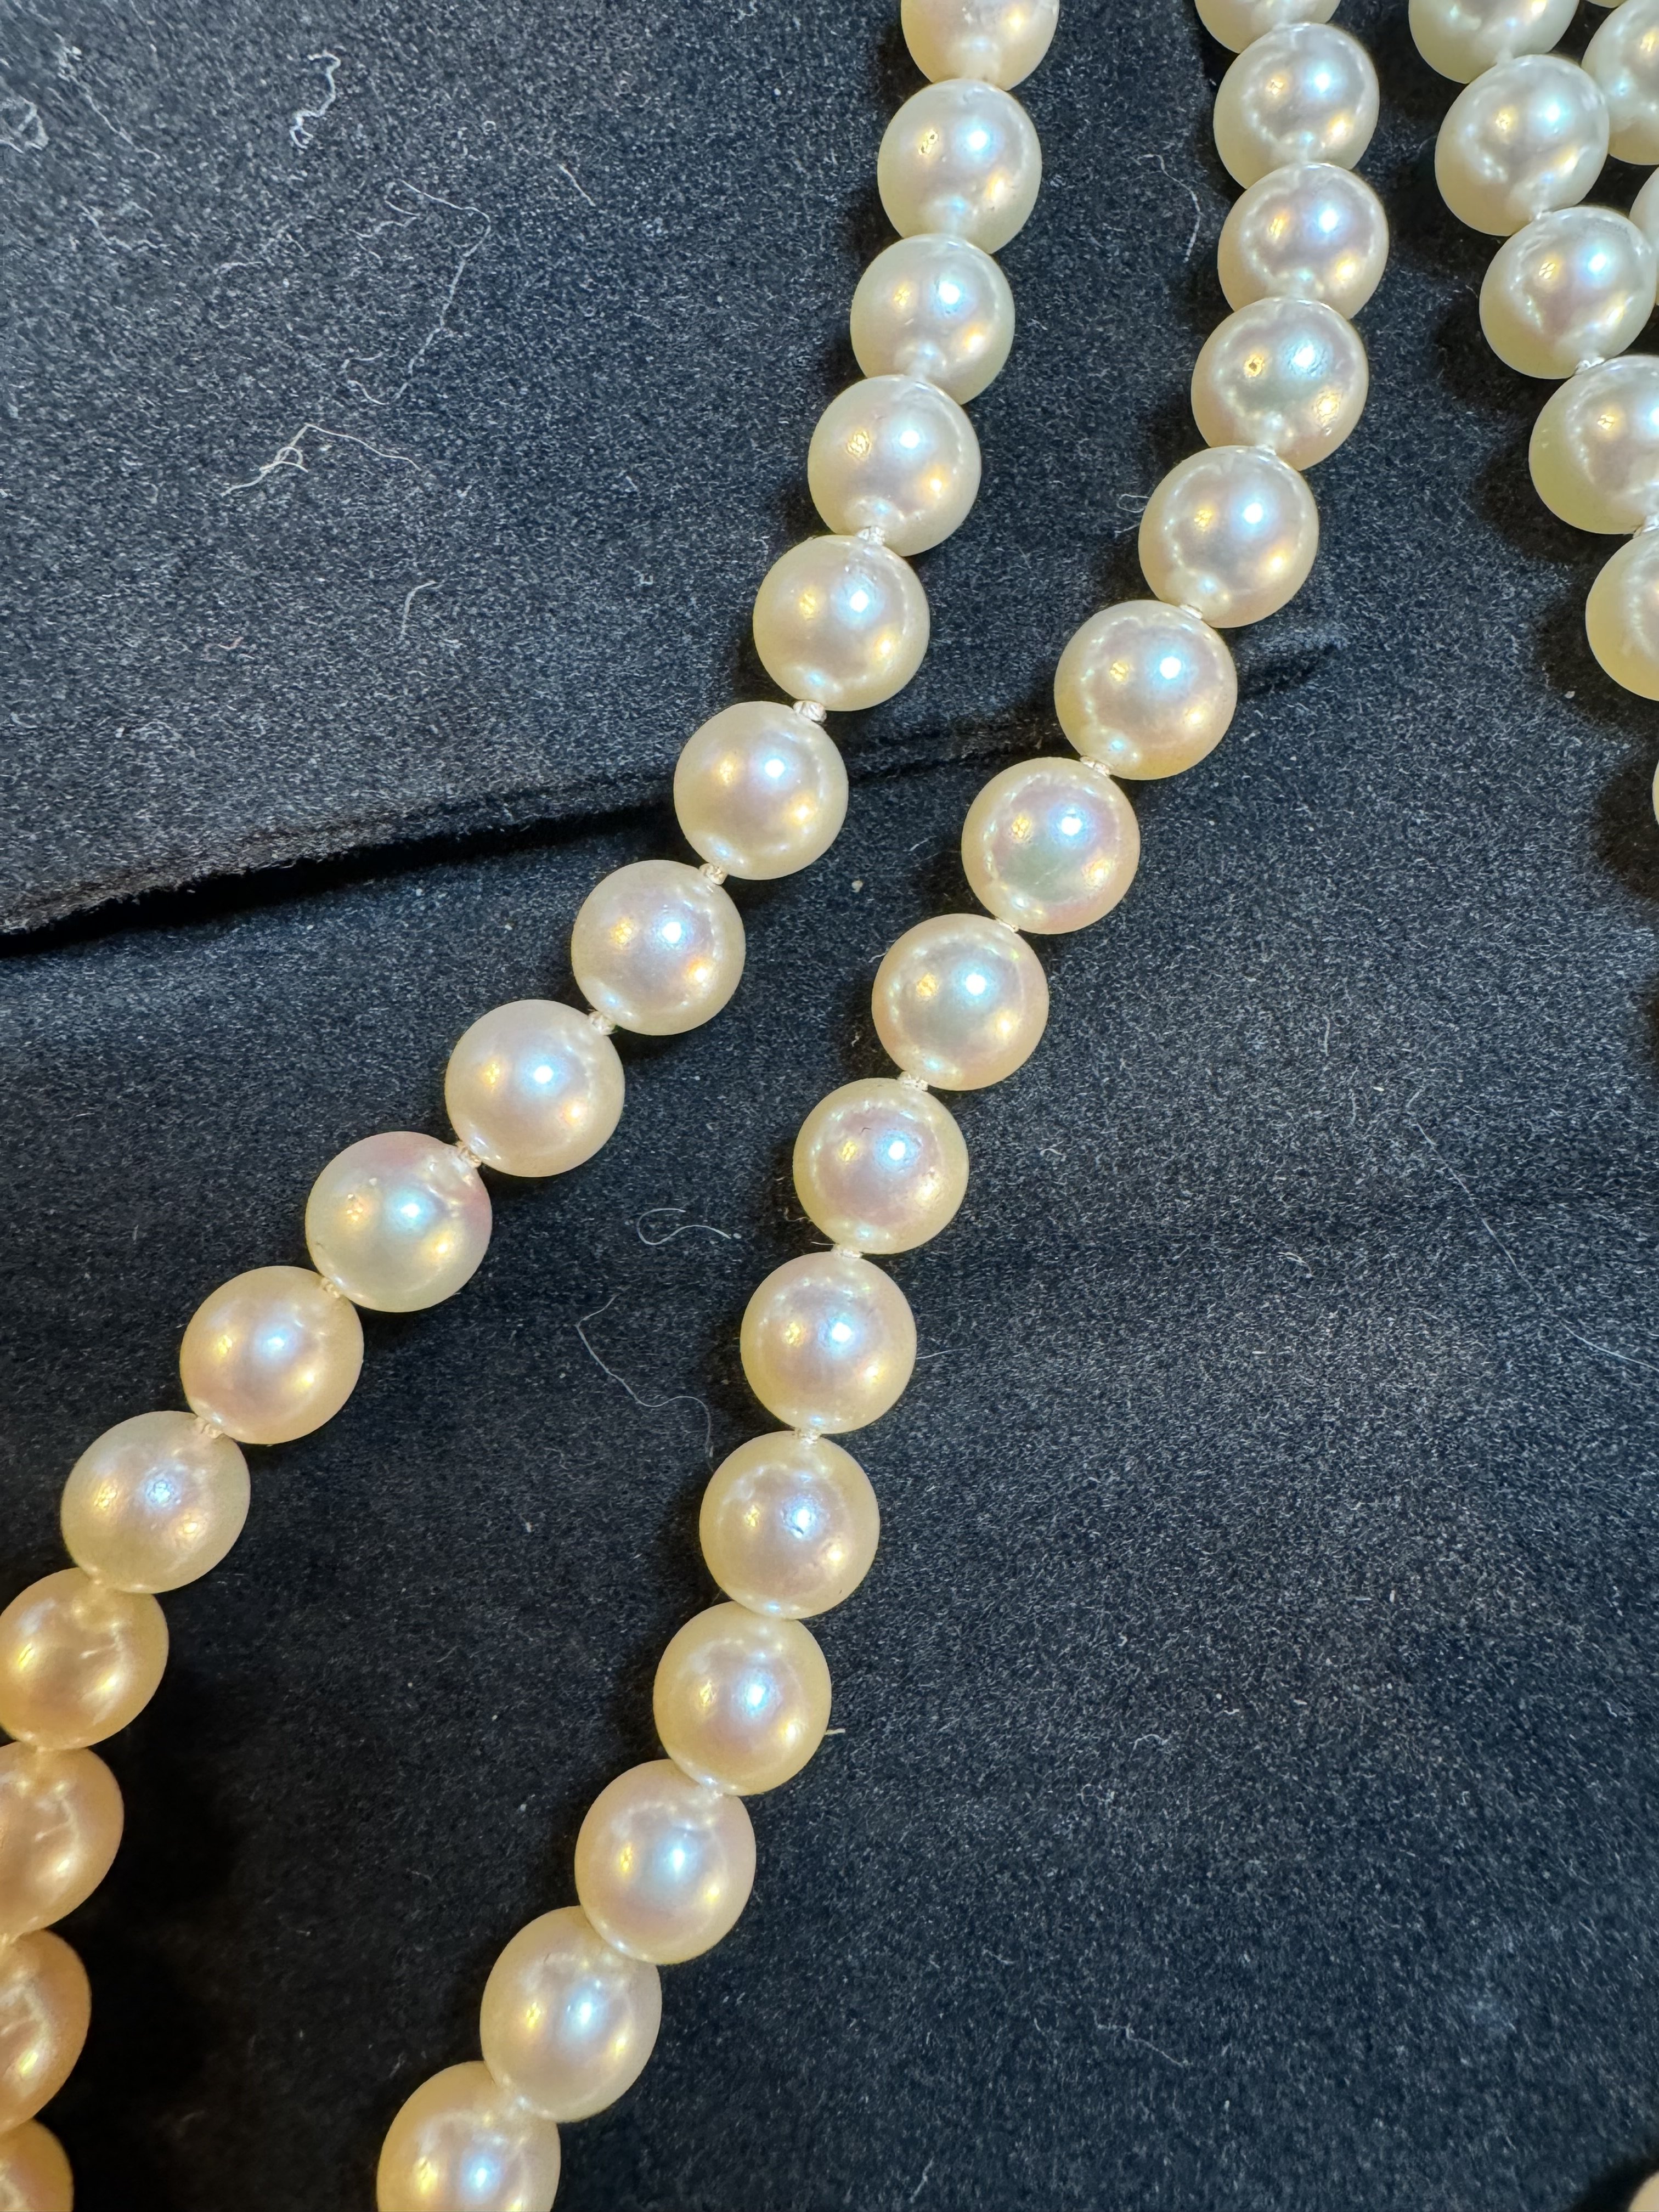 Estate pearls with no makers mark can you help identify?